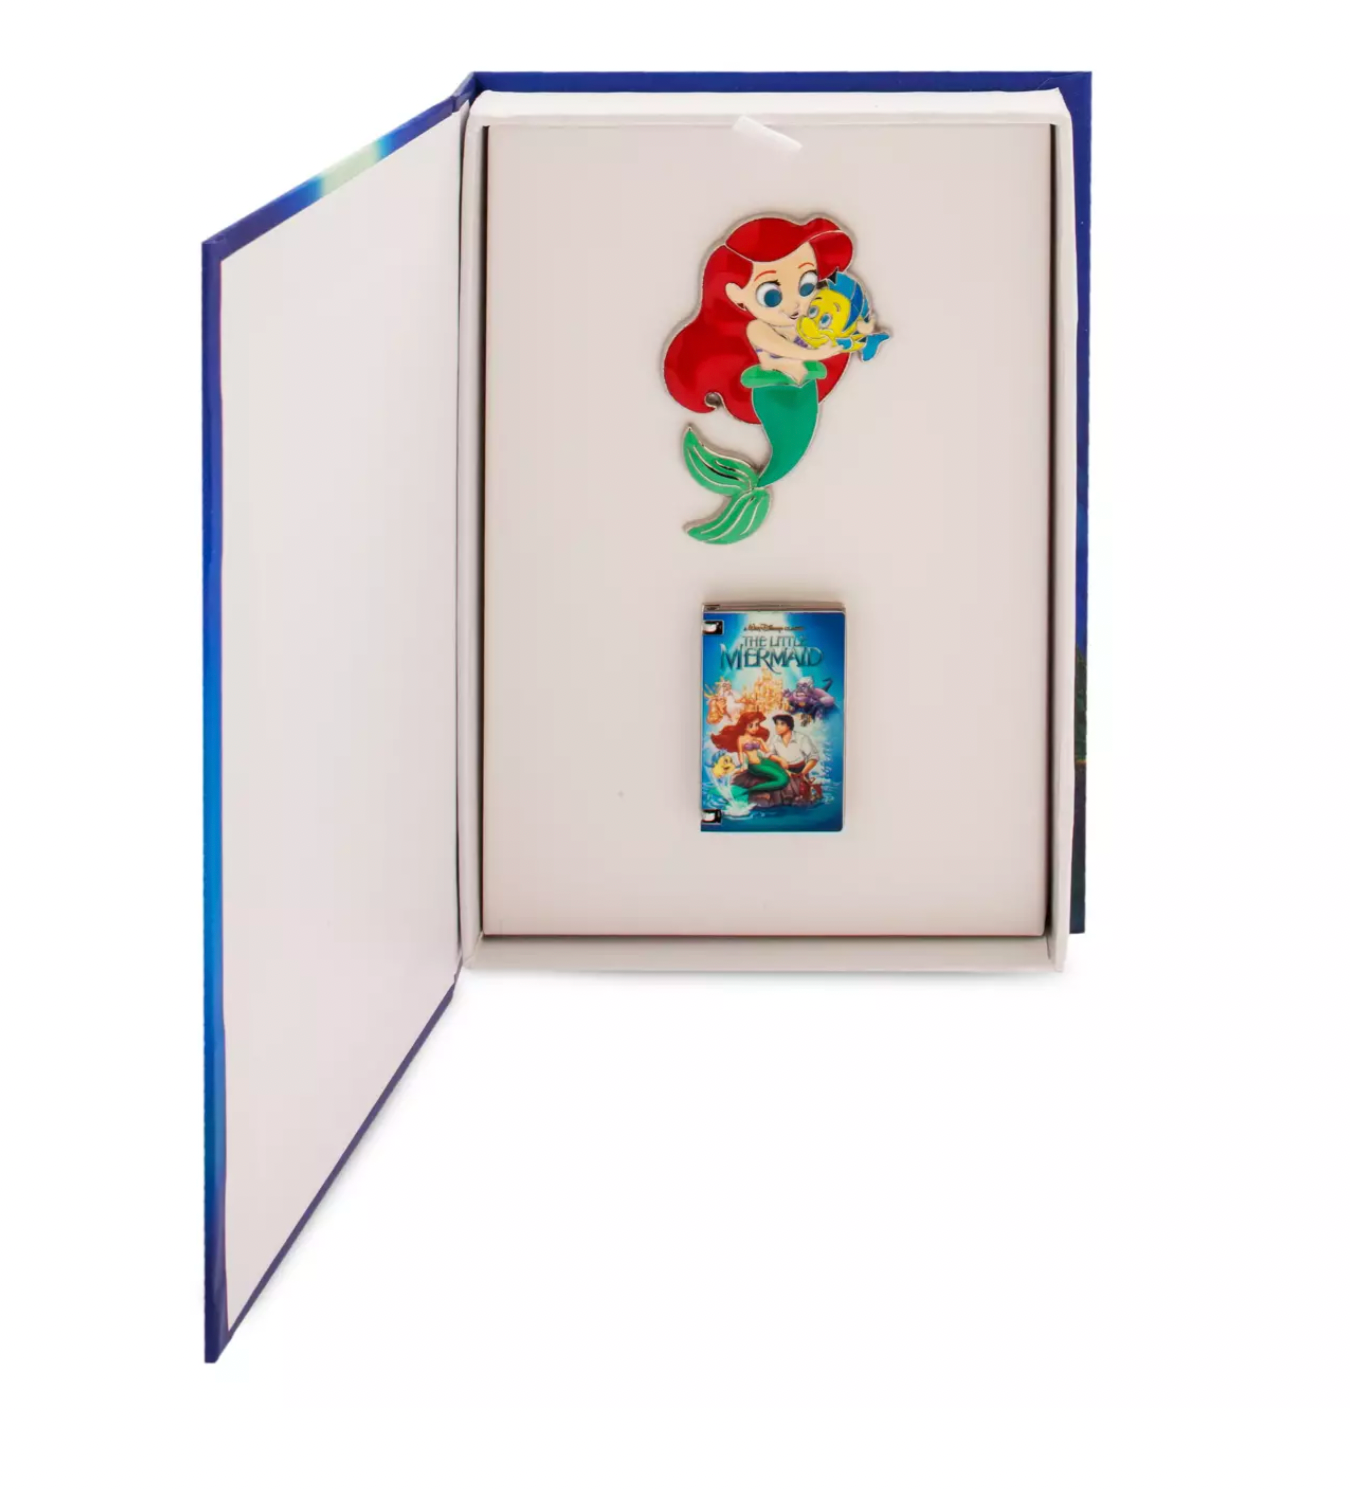 Disney The Little Mermaid Ariel and Flounder VHS Pin Set Limited Release New